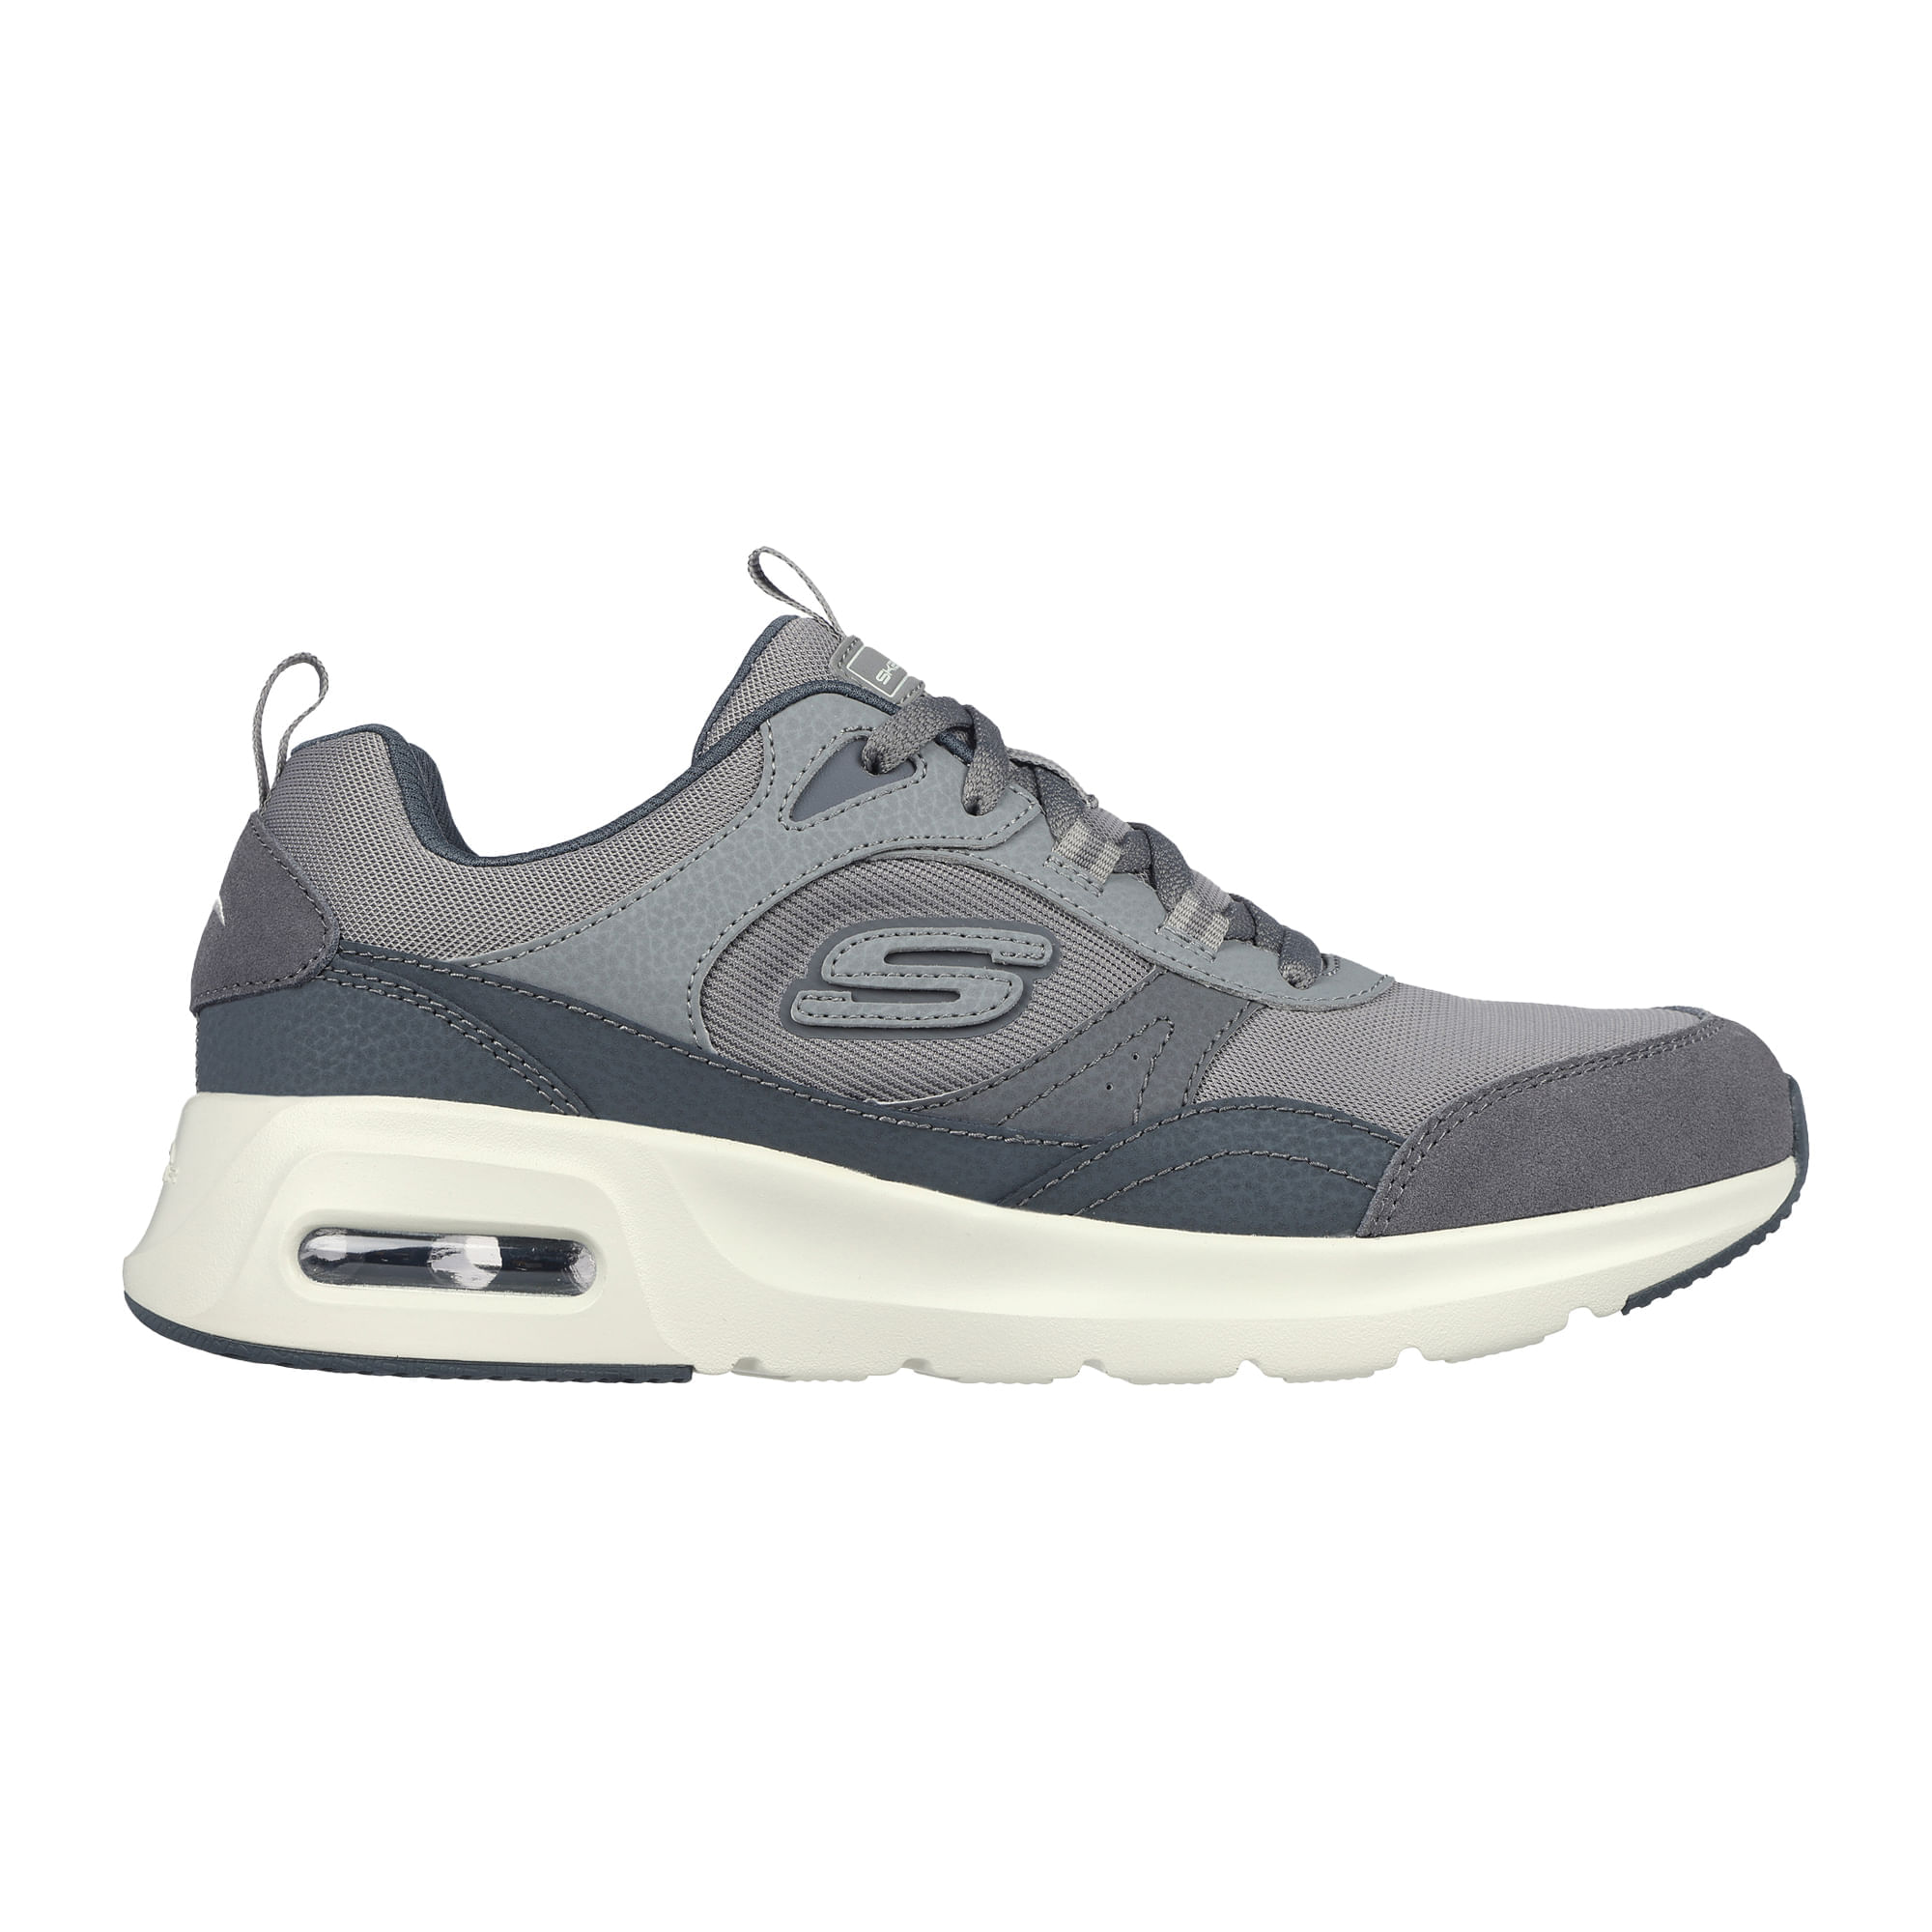 Zapato Hombre Skechers 232450 Gry - peopleplays